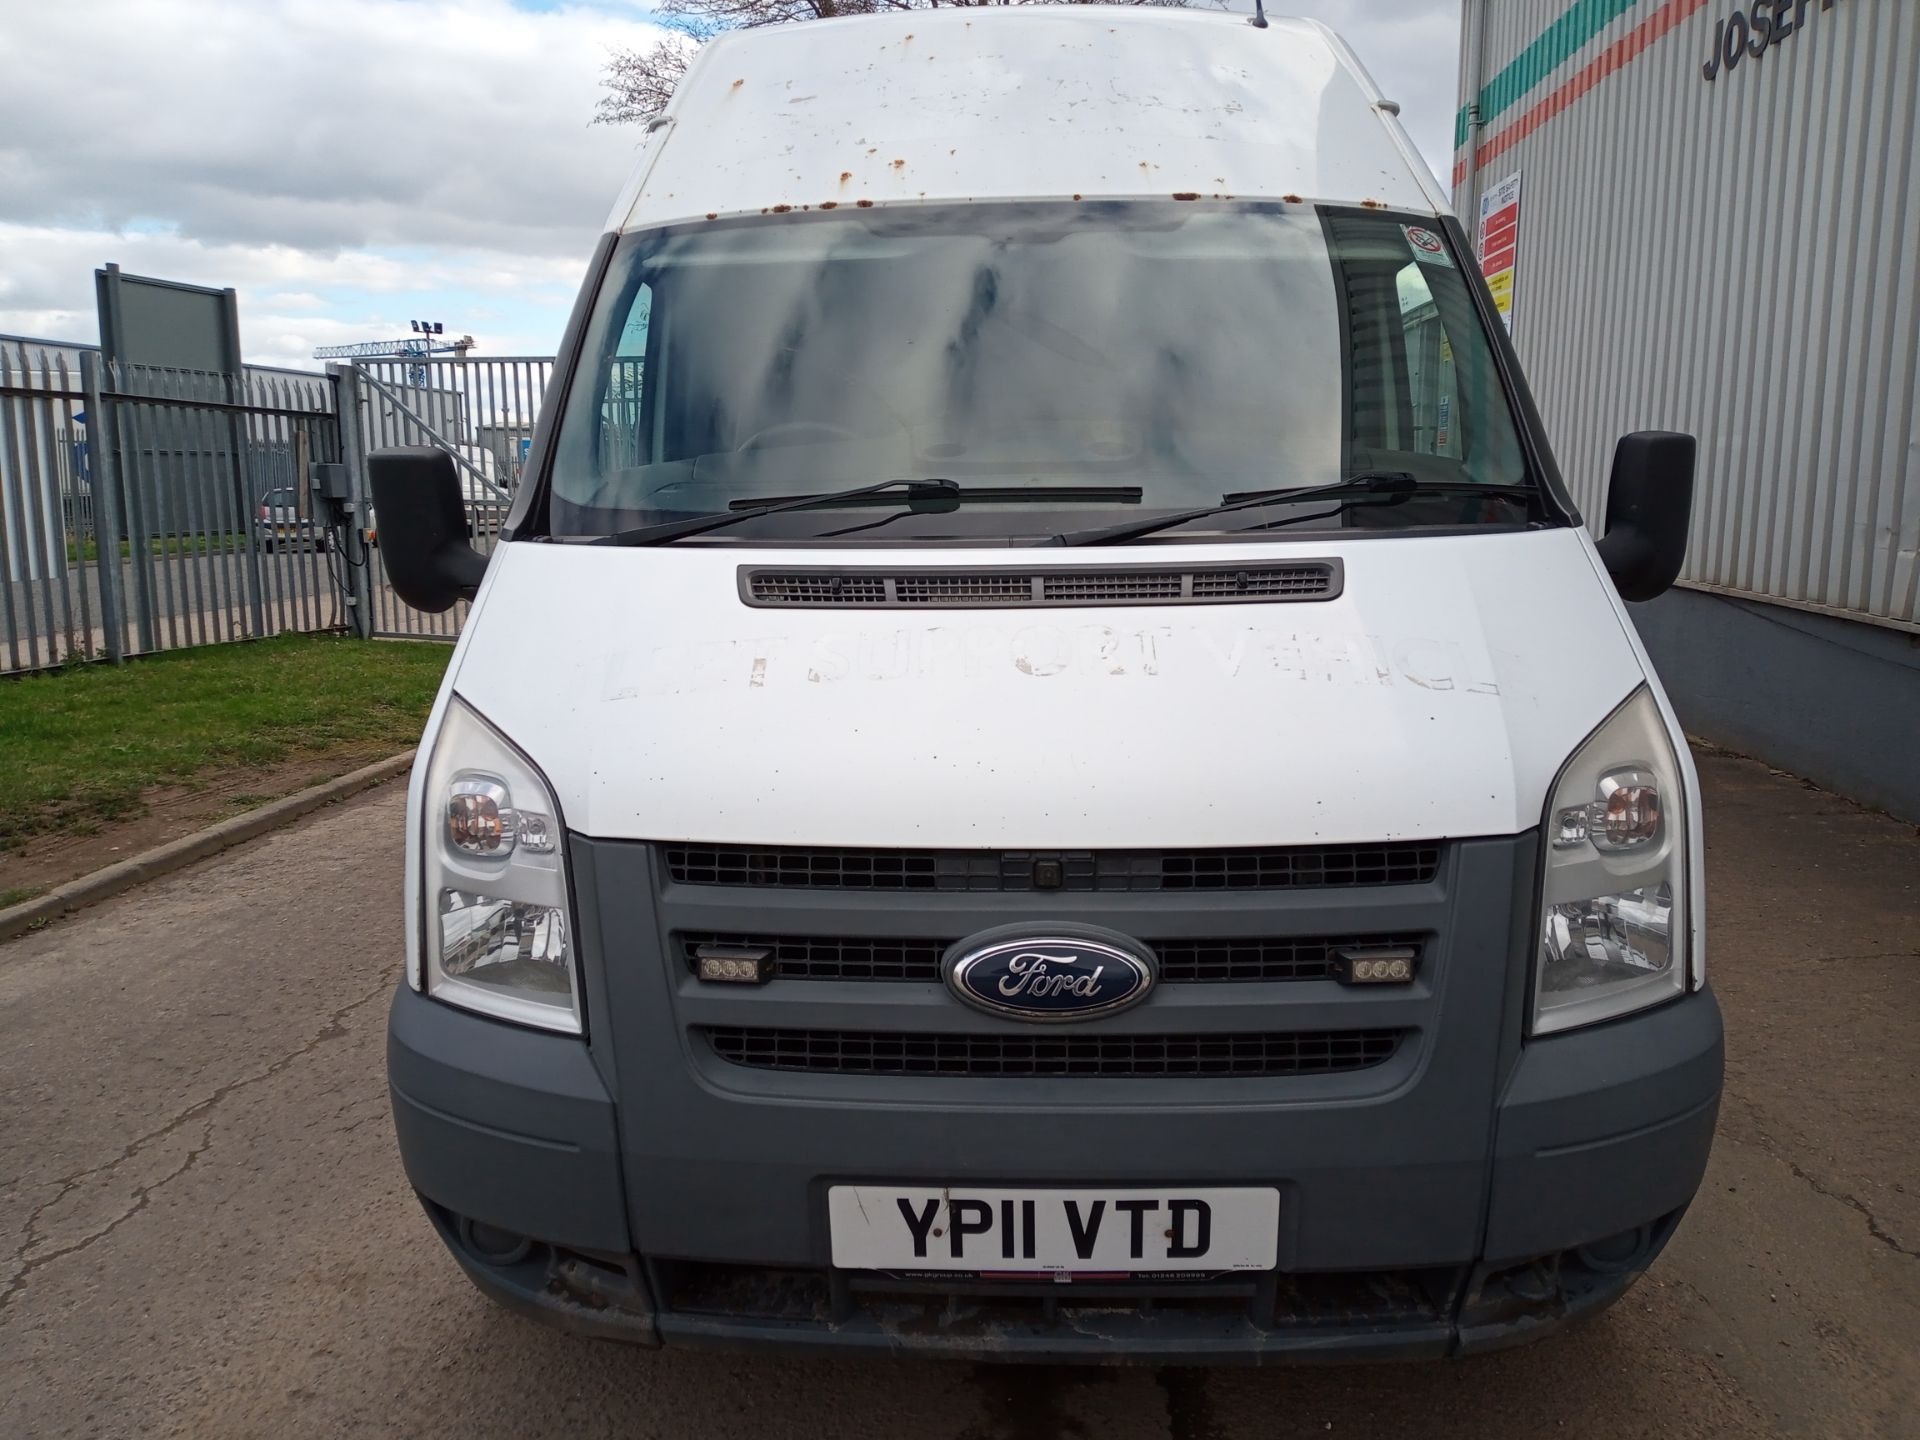 2011 Ford Transit 115 T350i RWD LWB Medium Roof - CL505 - Location: Corby, Northamptonshire140,182 - Image 3 of 16